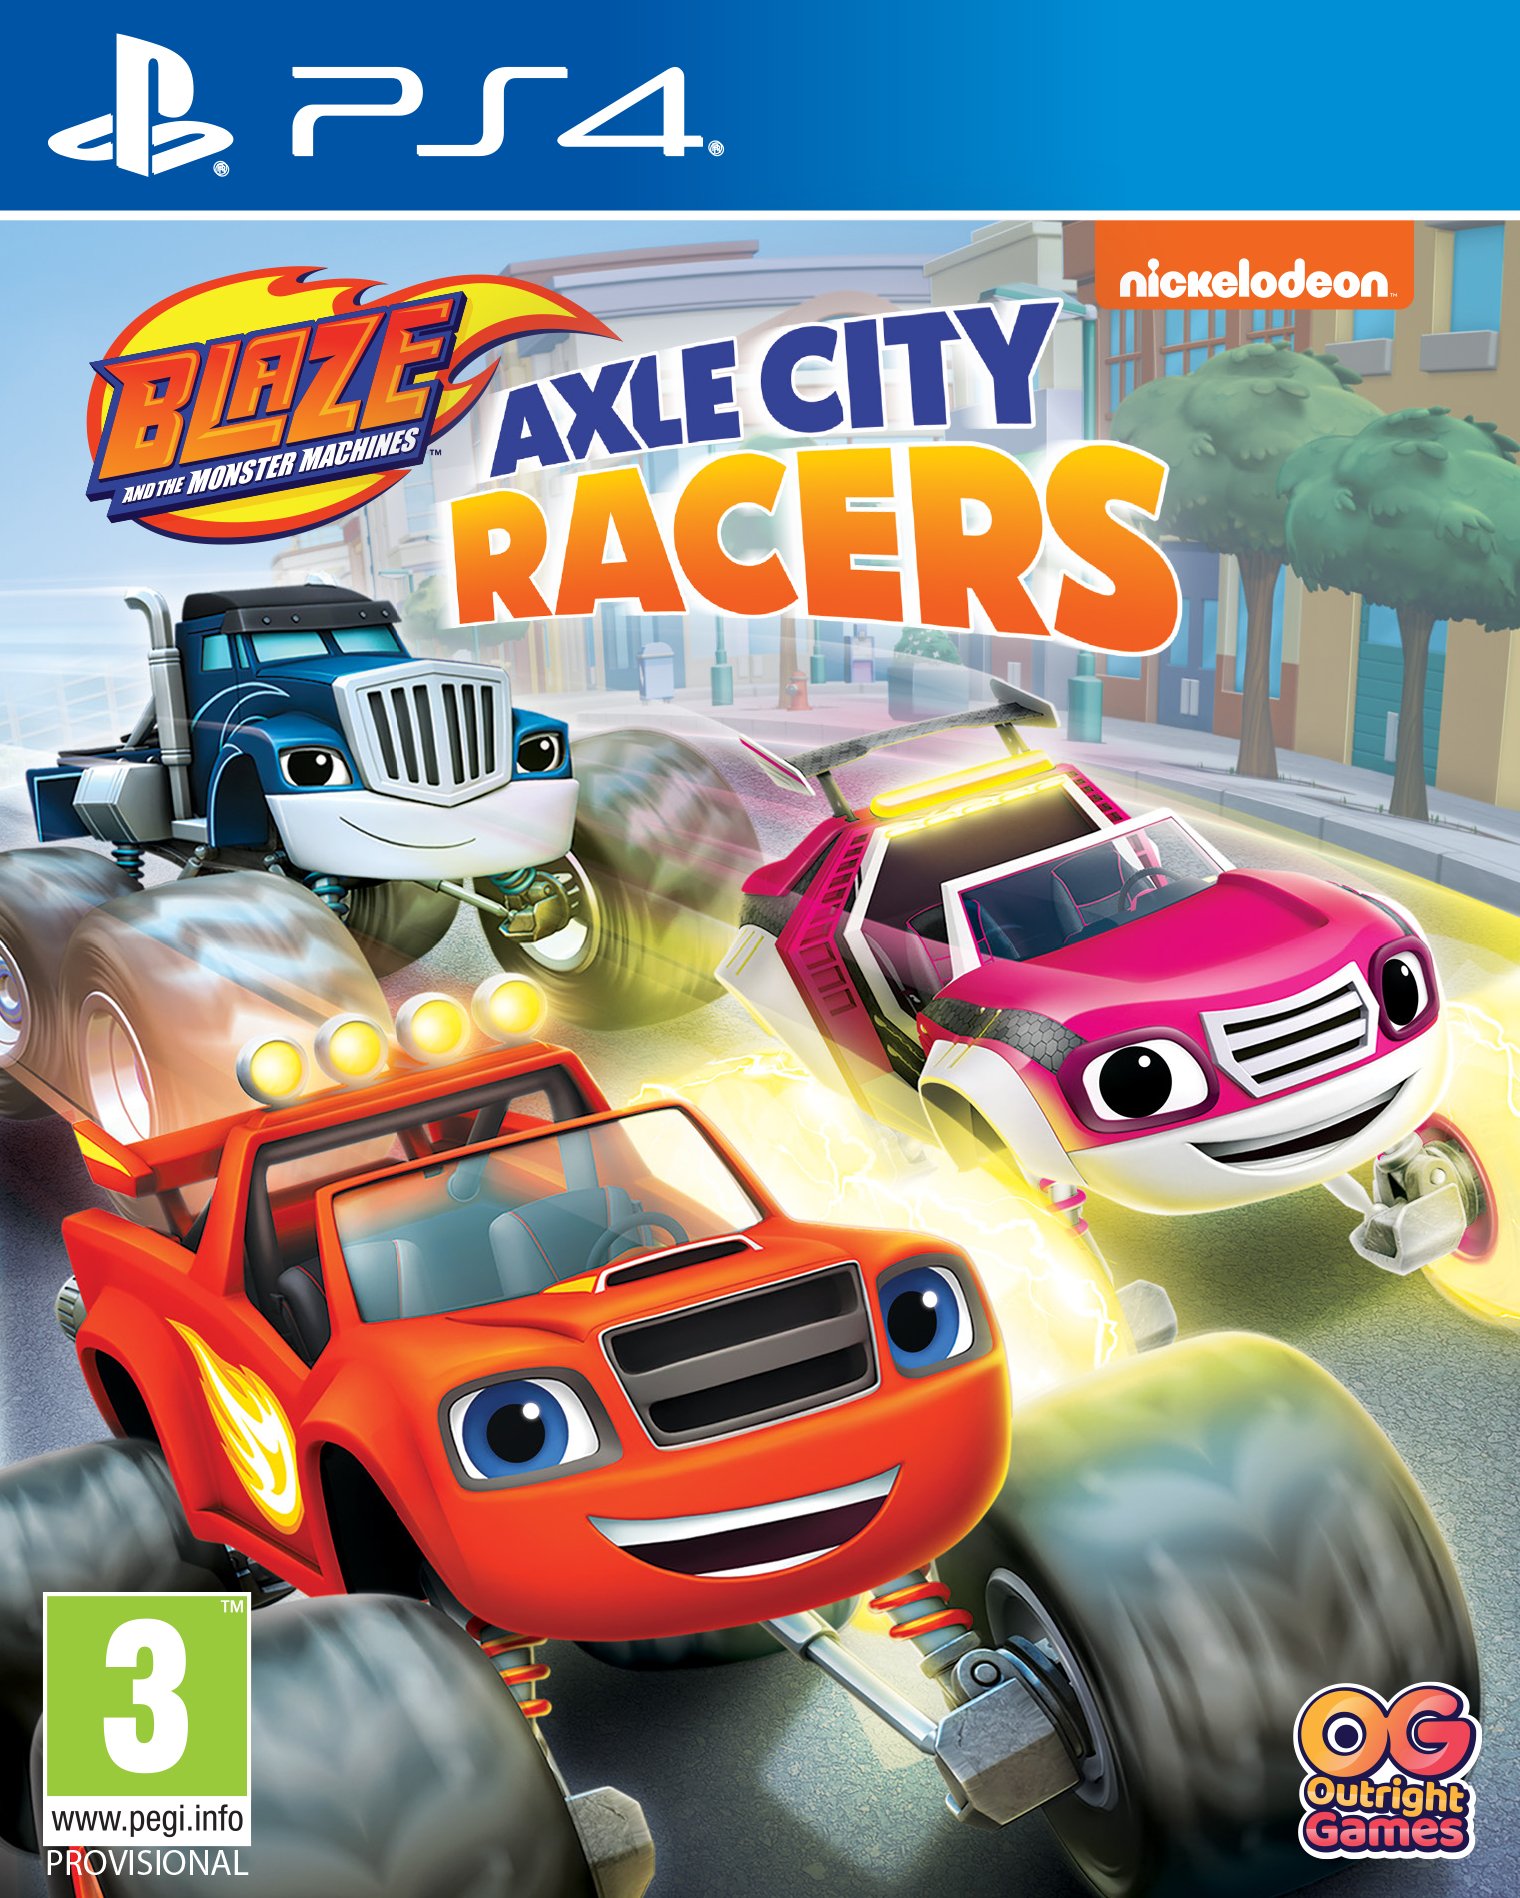 Køb Blaze and the Monster Axle City Racers - PlayStation 4 - - Standard